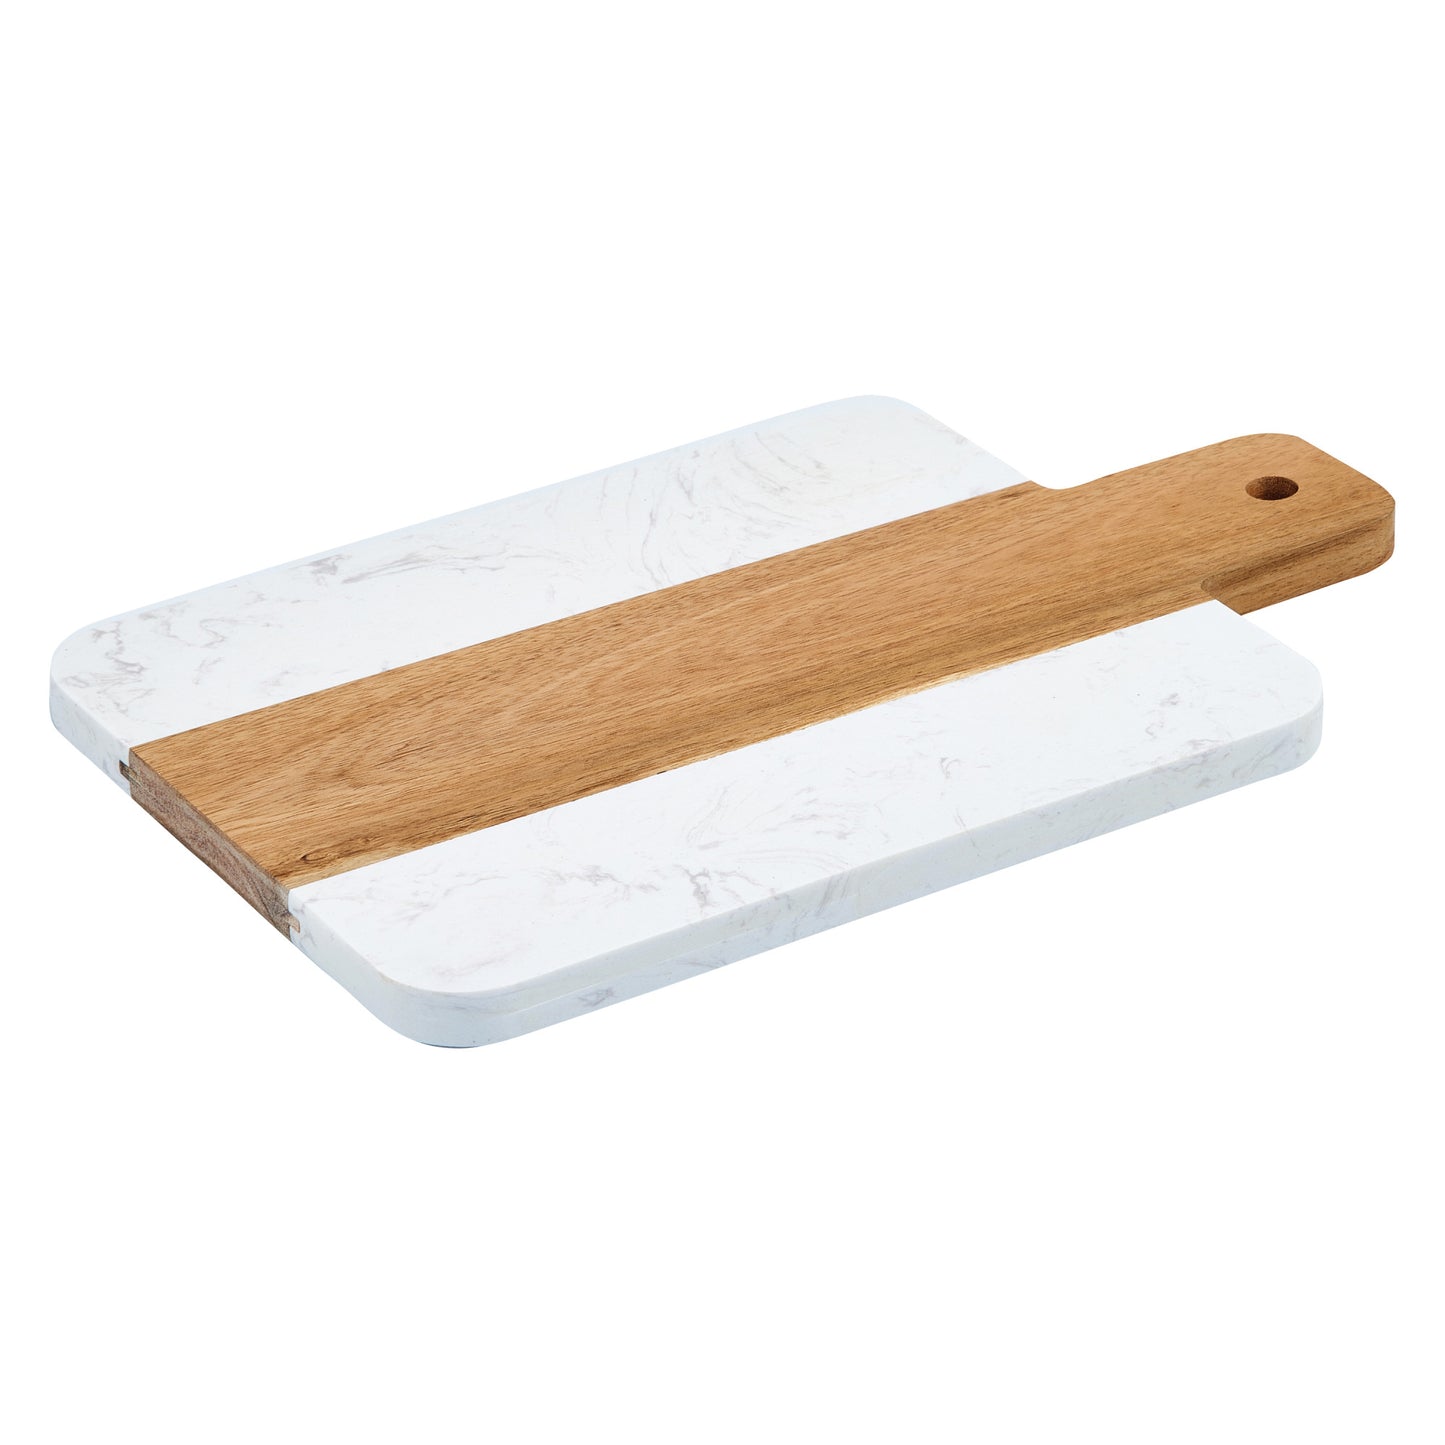 SBMW-117 - Marble and Wood Serving Board - 11-1/2"